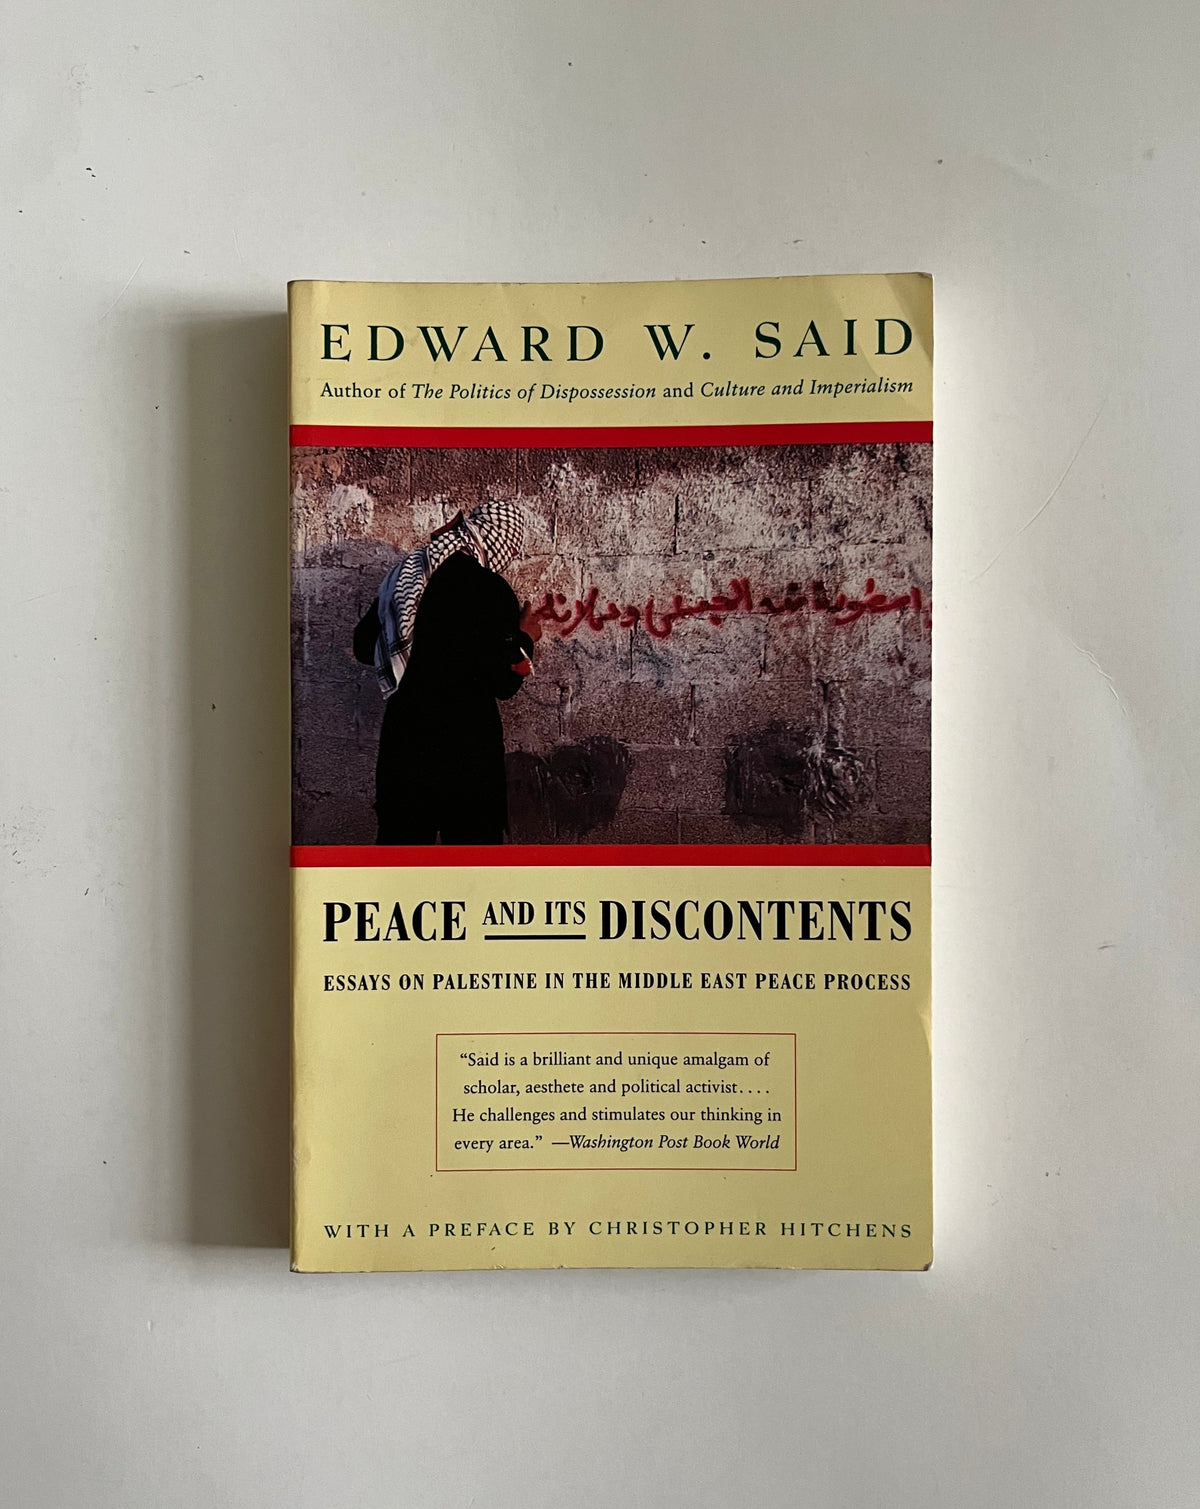 Peace and Its Discontents: Essays on Palestine in the Middle East Peace Process by Edward Said